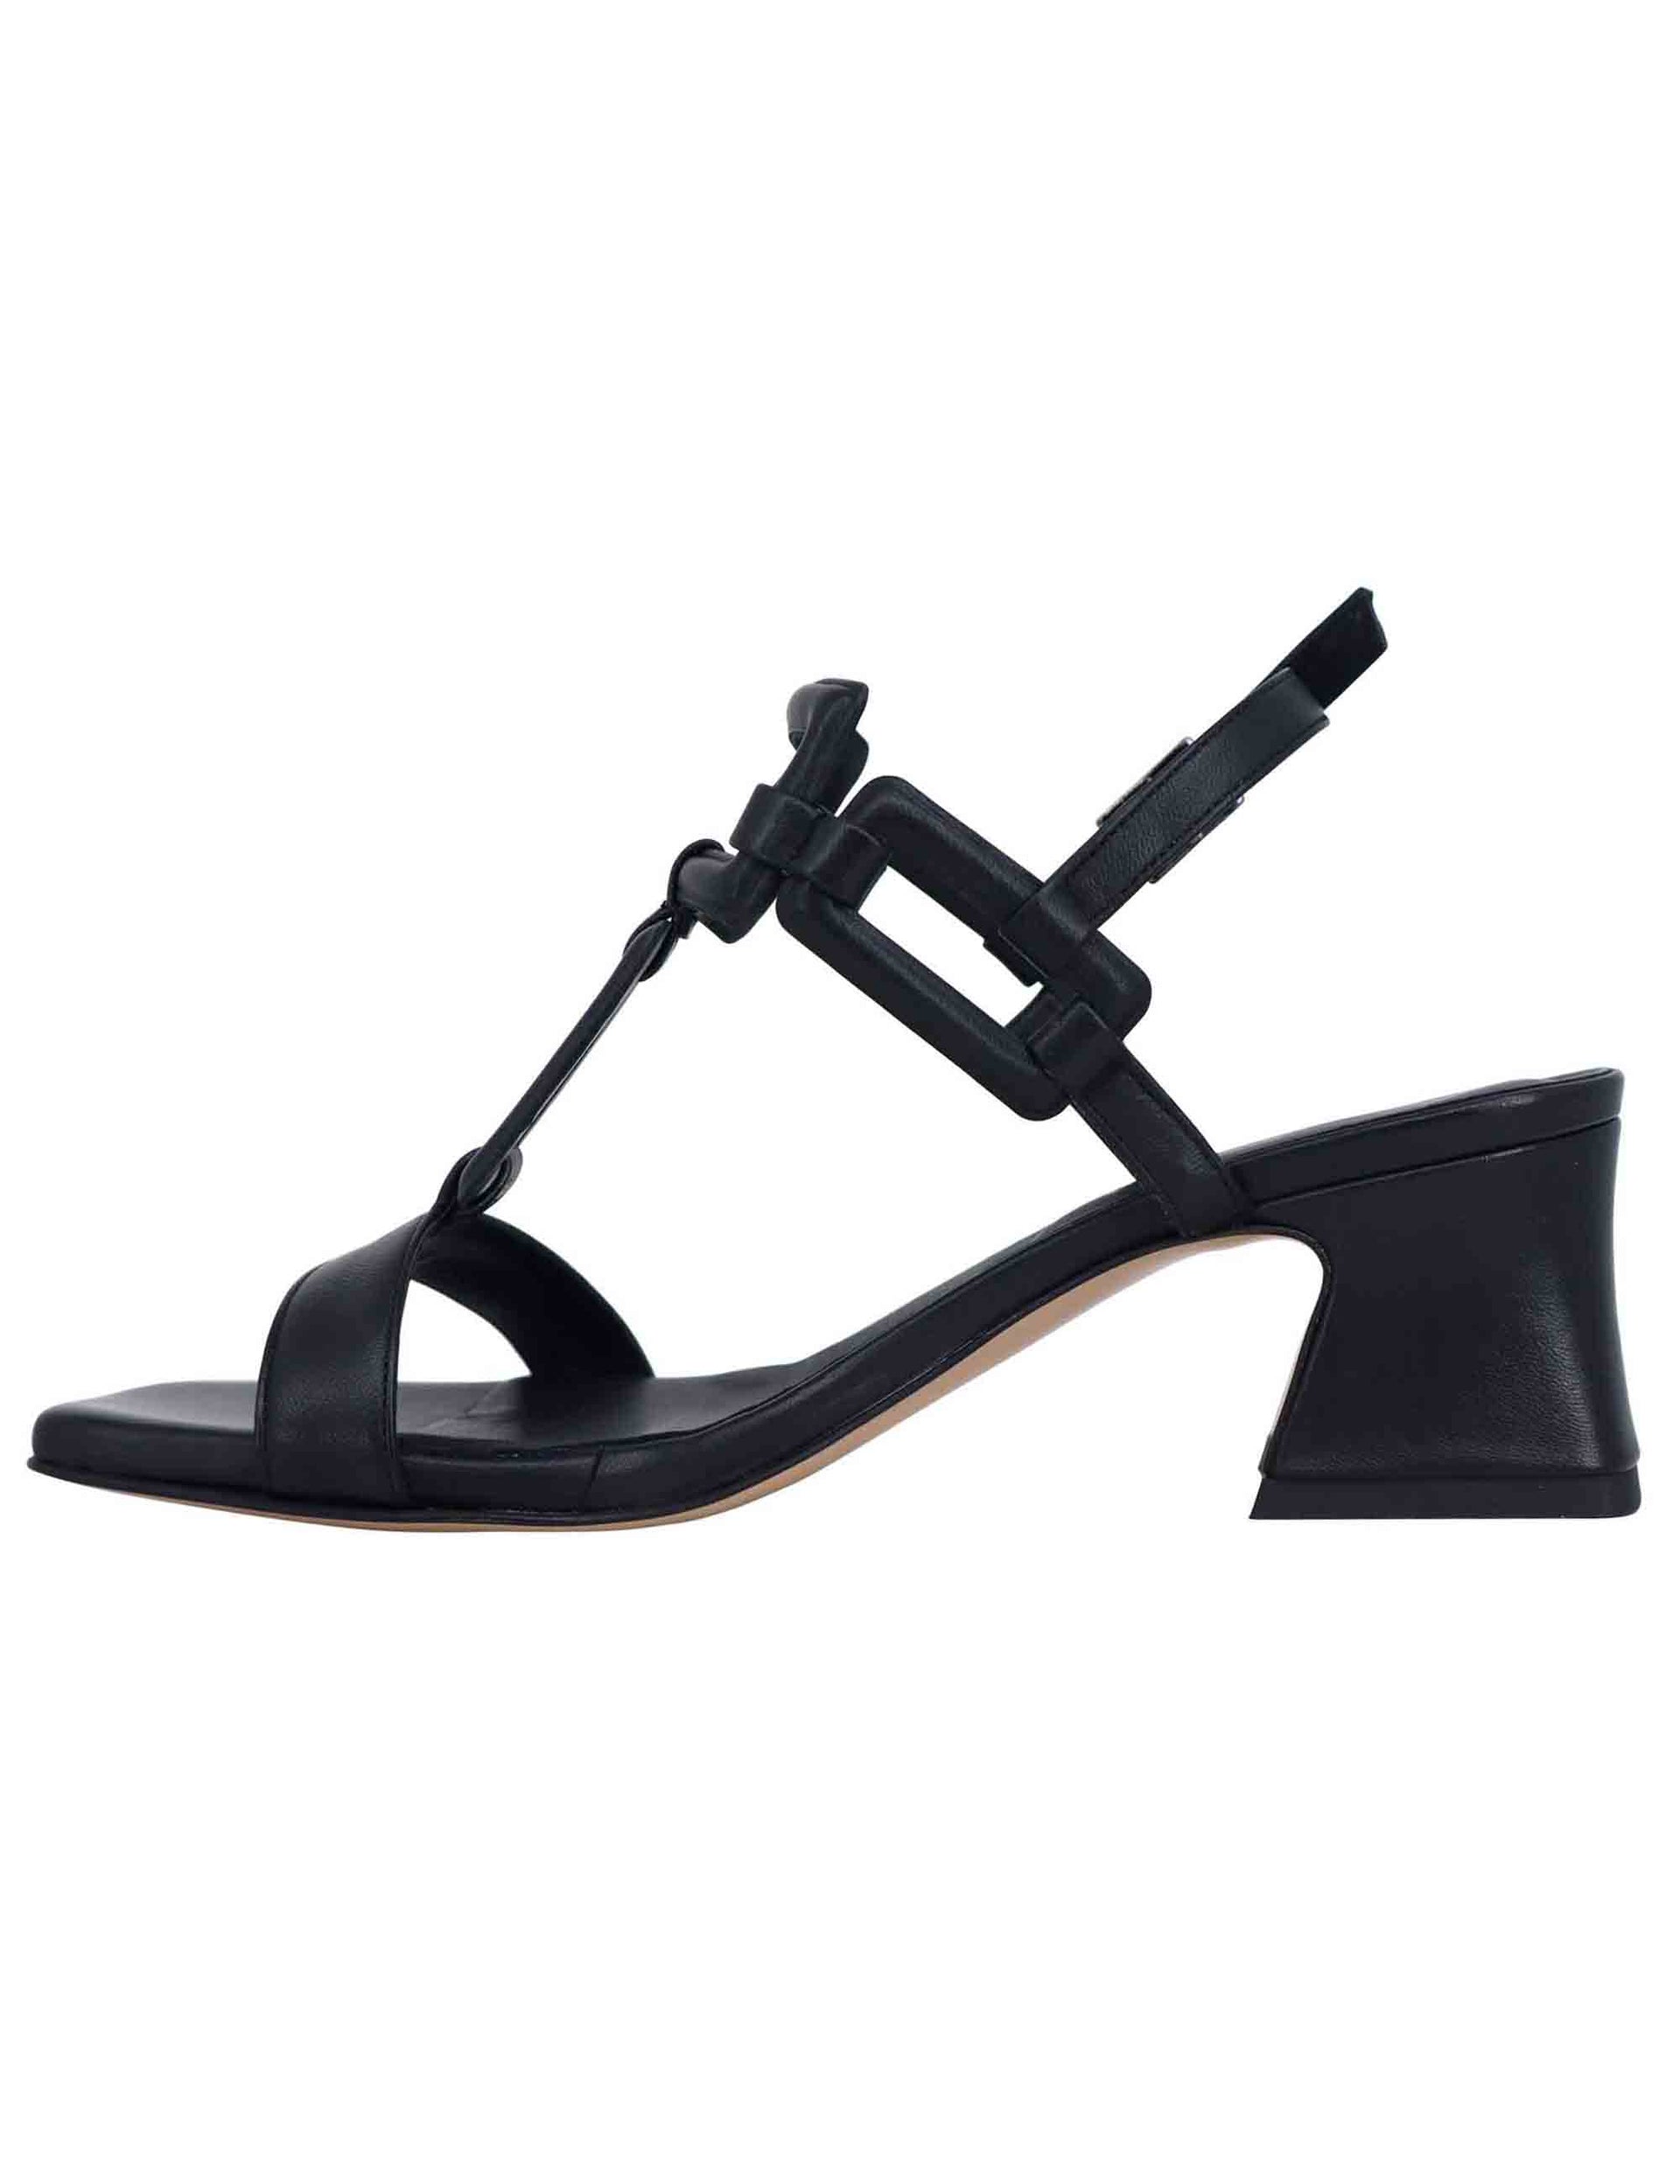 Women's black leather sligback sandals with square toe and leather heel